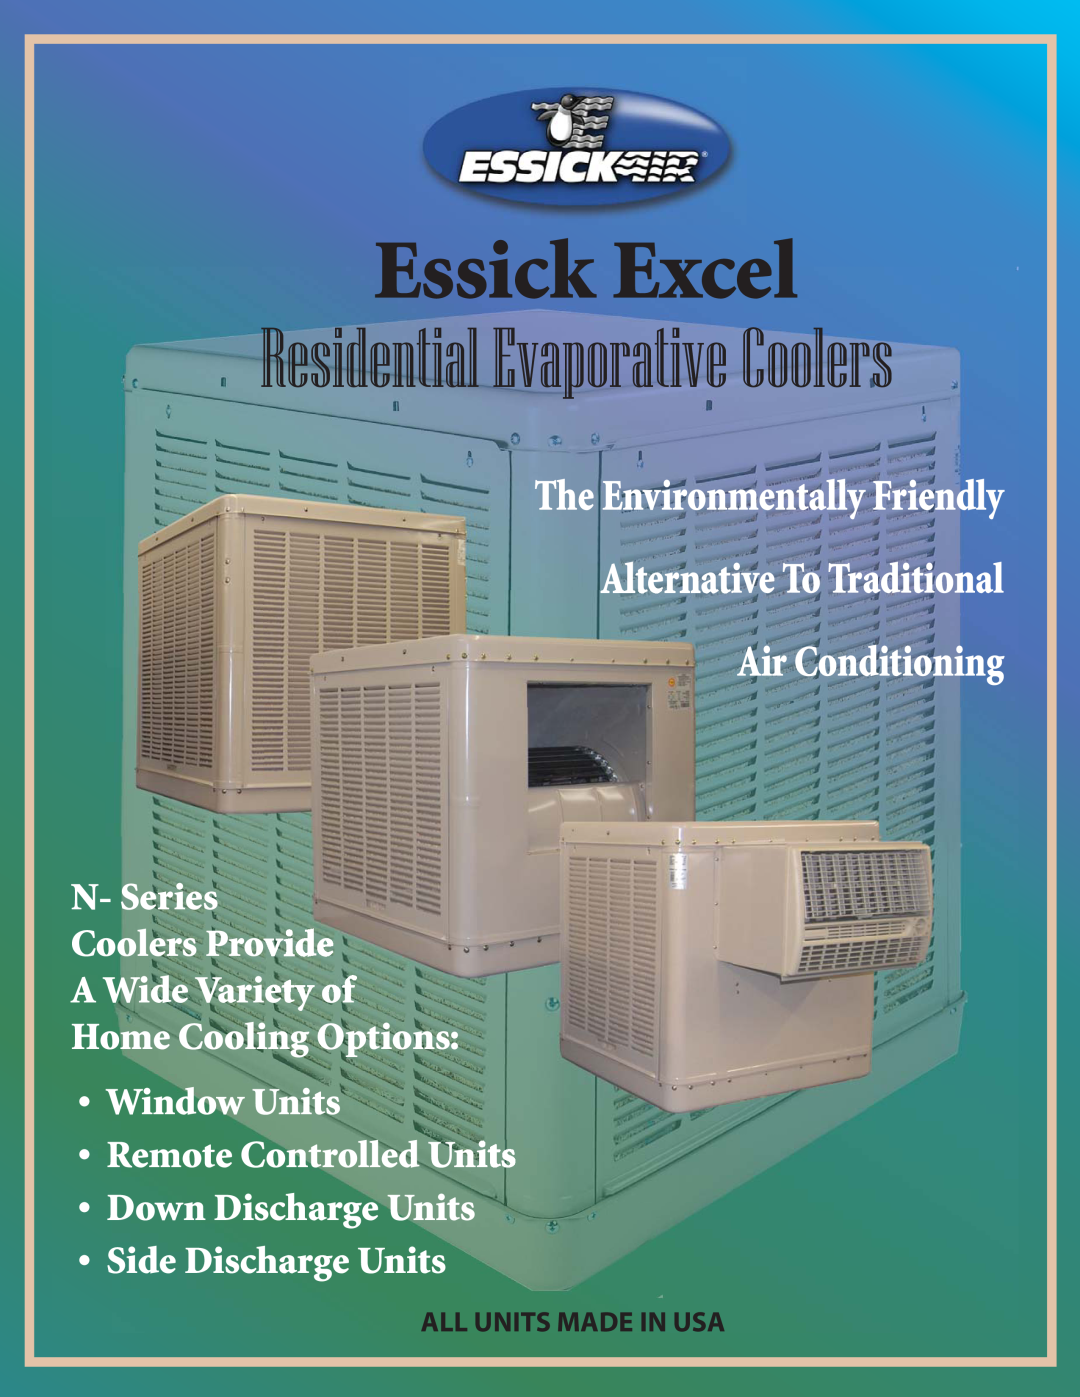 Essick Air N- Series manual Essick Excel, Residential Evaporative Coolers, Alternative To Traditional Air Conditioning 